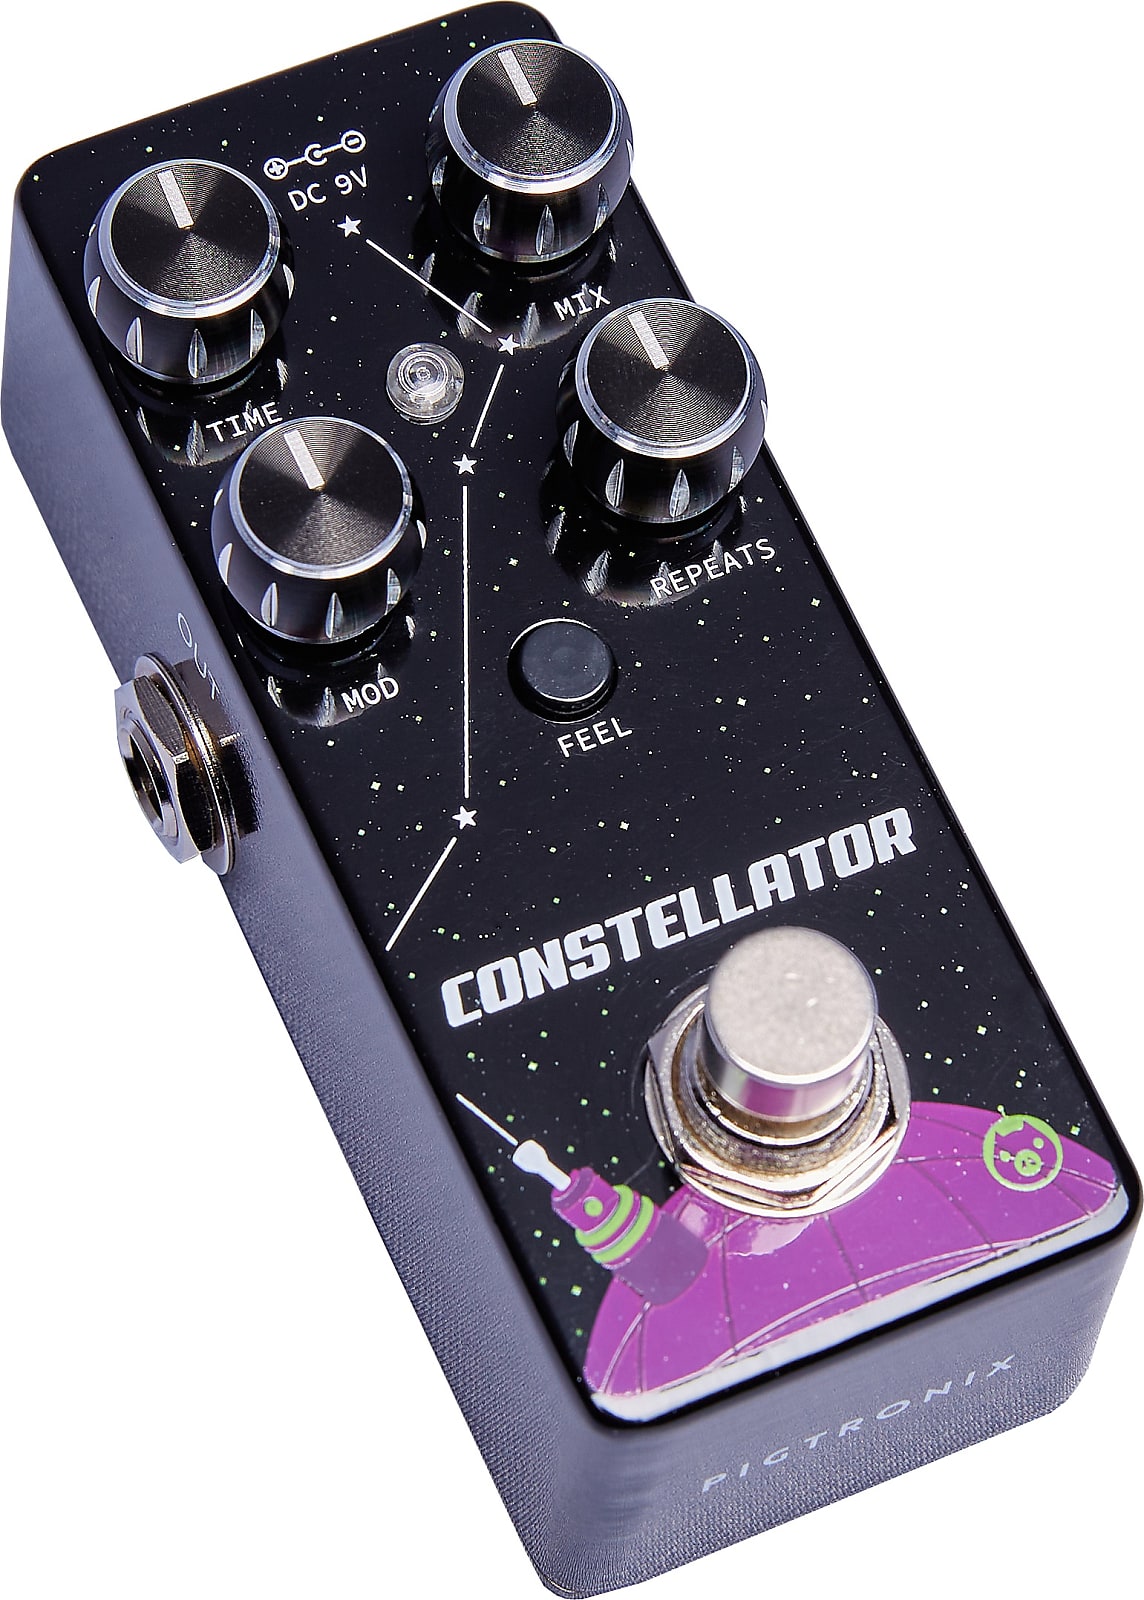 Pigtronix MAD Constellator Modulated Analog Delay Micro Effects Pedal